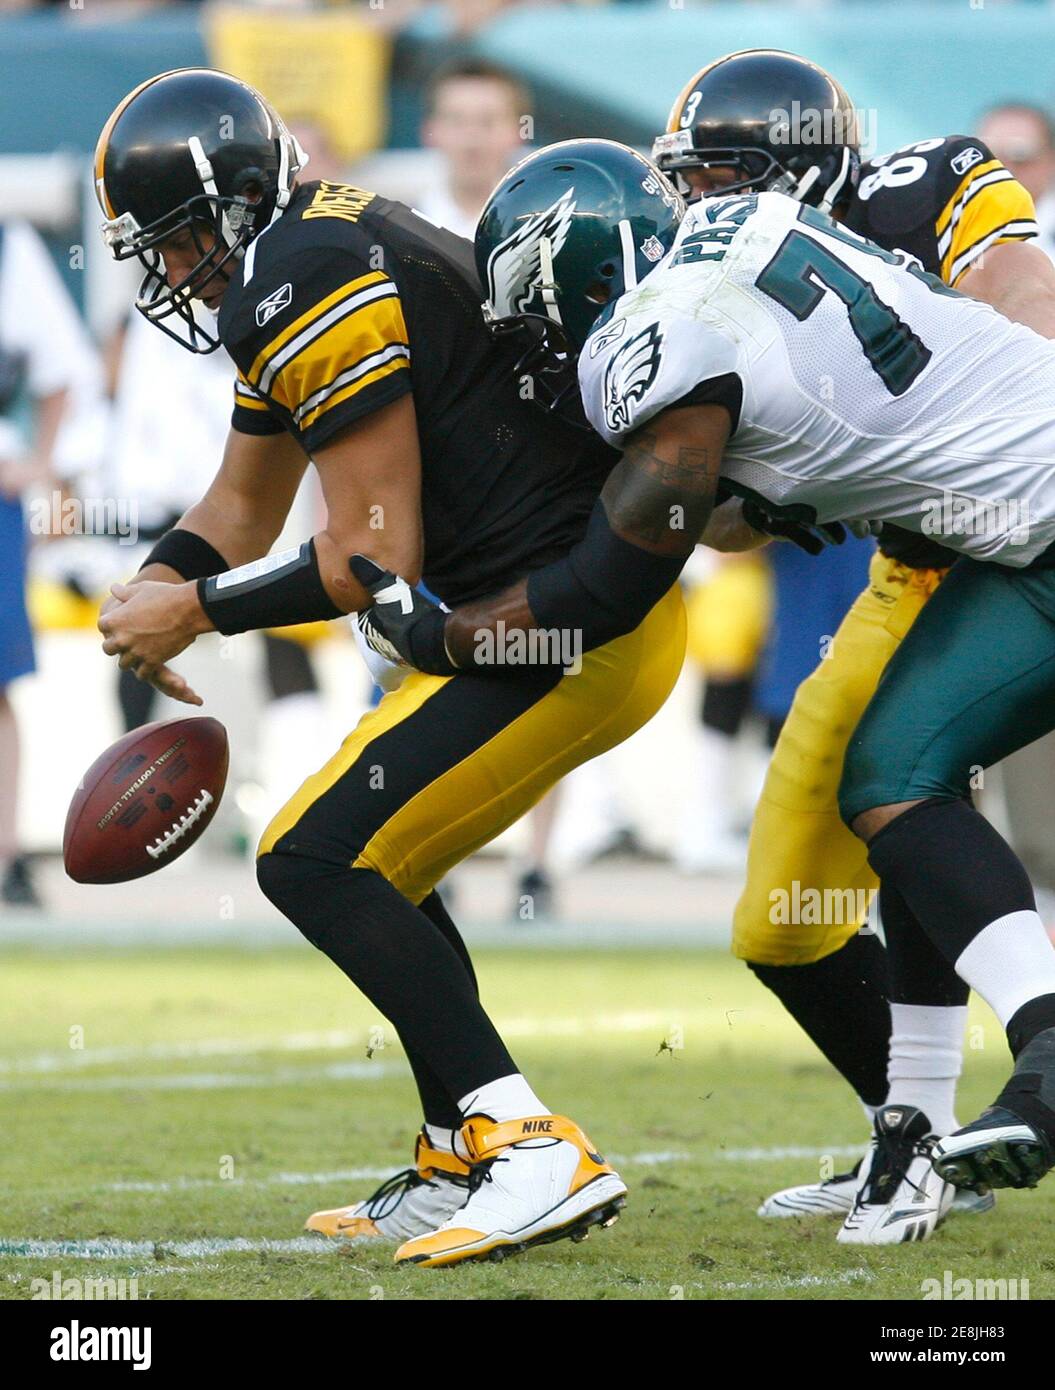 Pittsburgh Steelers quarterback Ben Roethlisberger (L) fumbles while being  tackled by the Philadelphia Eagles defensive end Jaqua Parker (R) during  the second quarter of NFL football game action in Philadelphia,  Pennsylvania, September